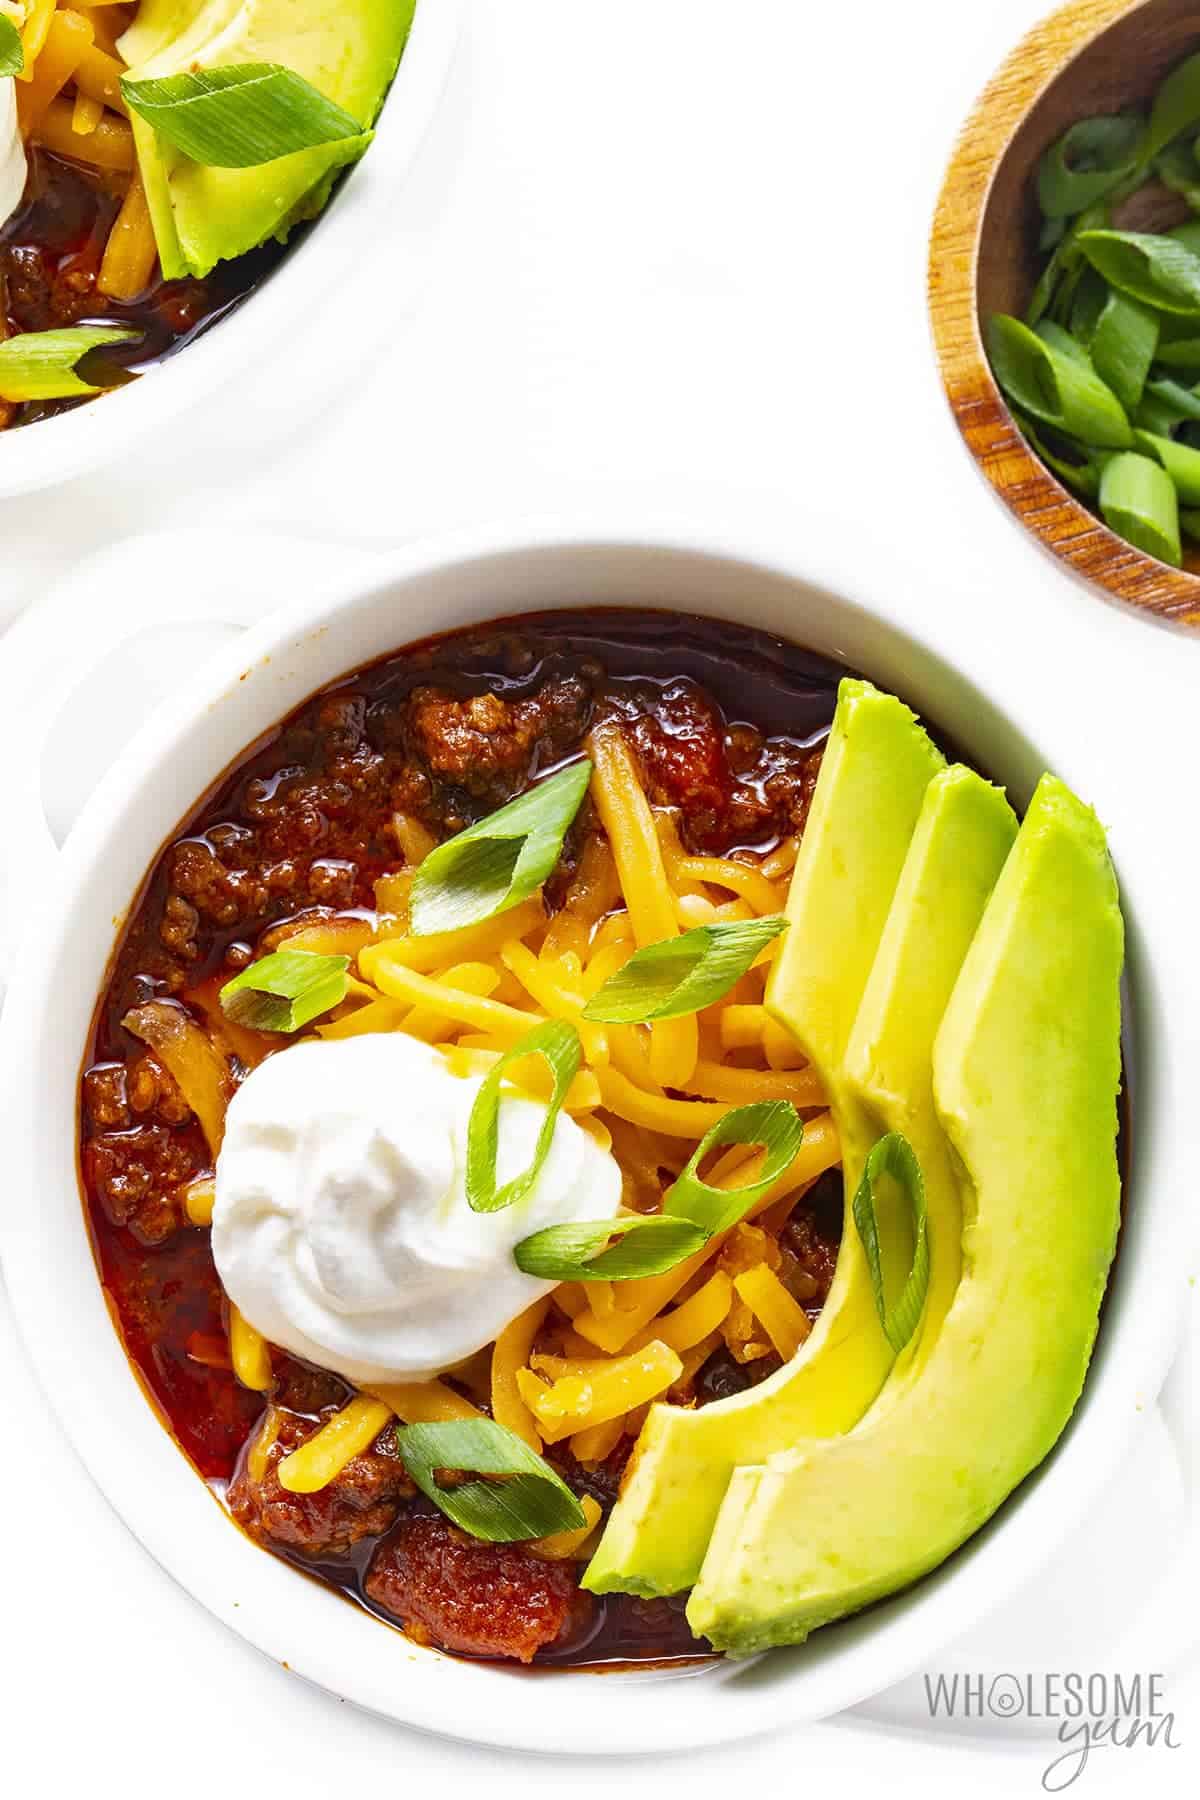 Keto friendly chili in bowls with toppings.